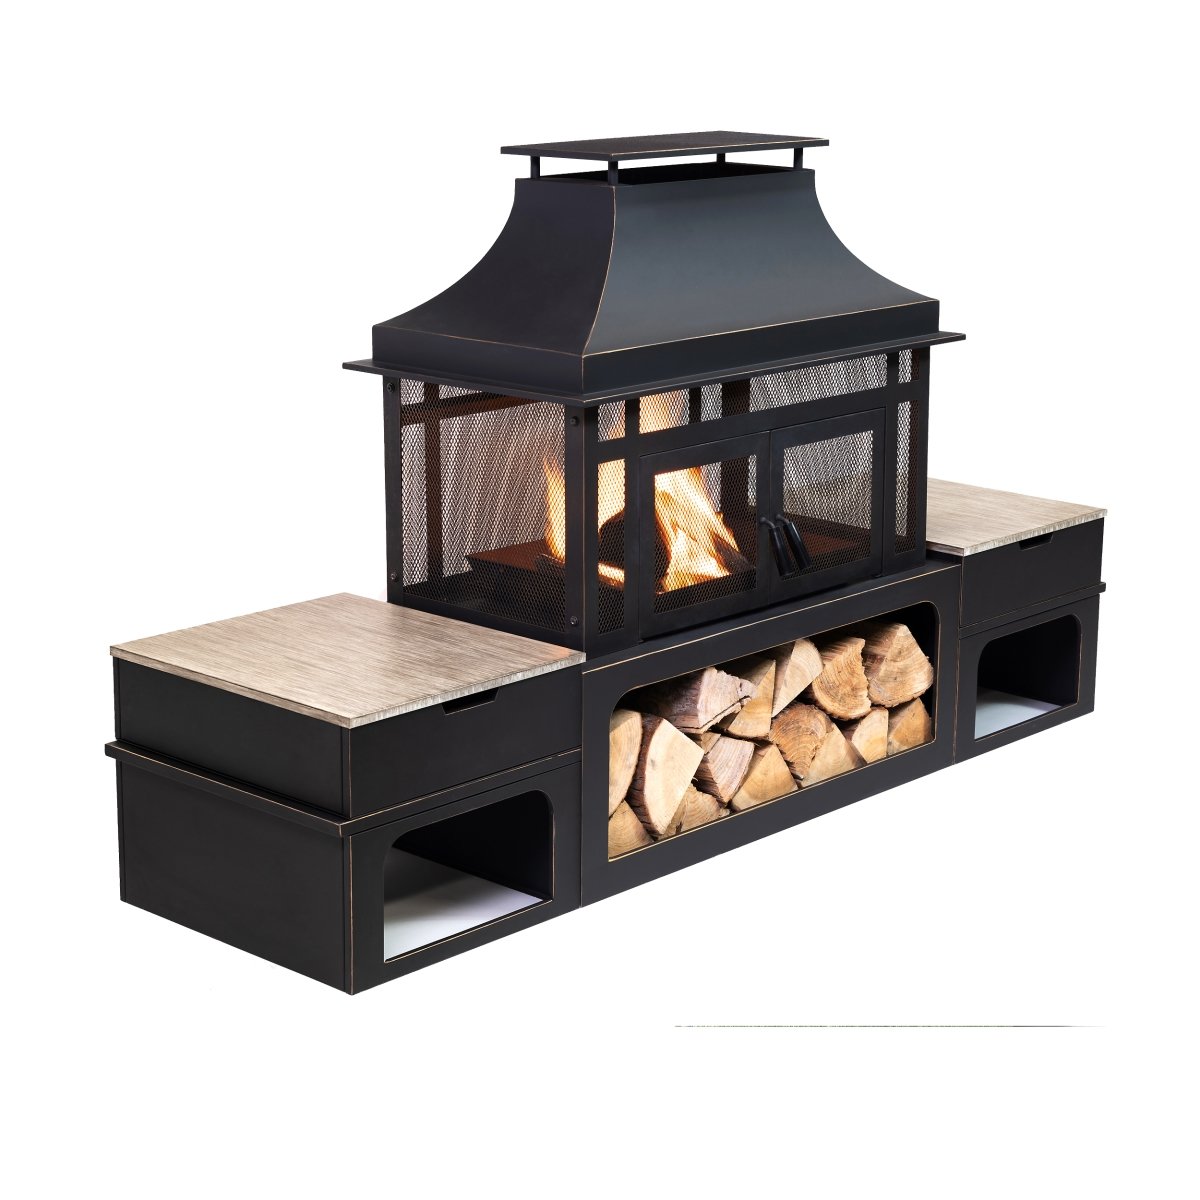 Picture of Deko Living COB10504 80 in. Rectangular Outdoor Steel Woodburning Fireplace with Log Storage Compartment & Side Tables